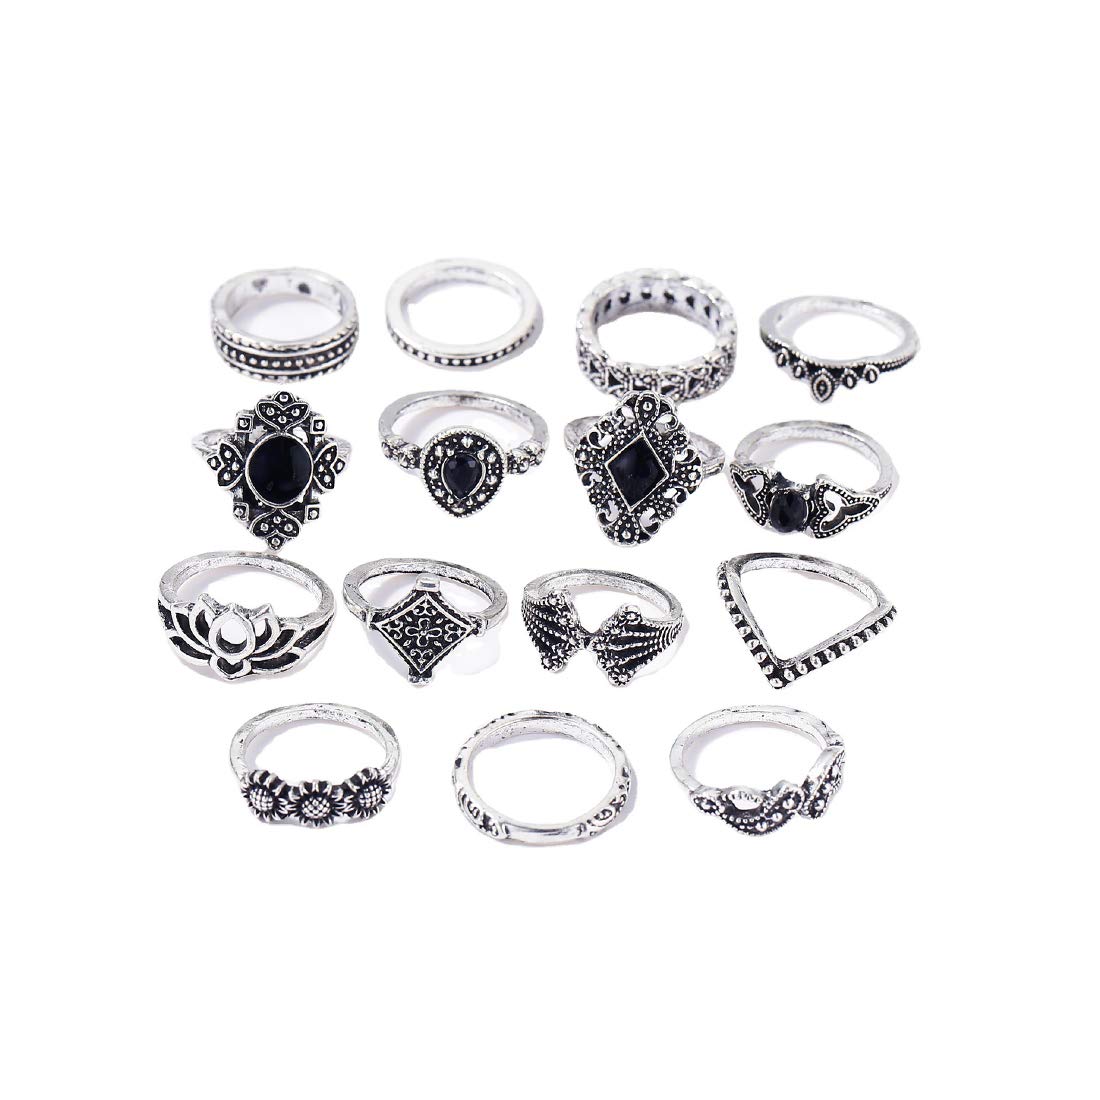 Yellow Chimes Rings for Women 15 PCs Combo Ring Set Boho Vintage Style Silver Oxidised Plated Knuckle Rings Set for Women and Girls.